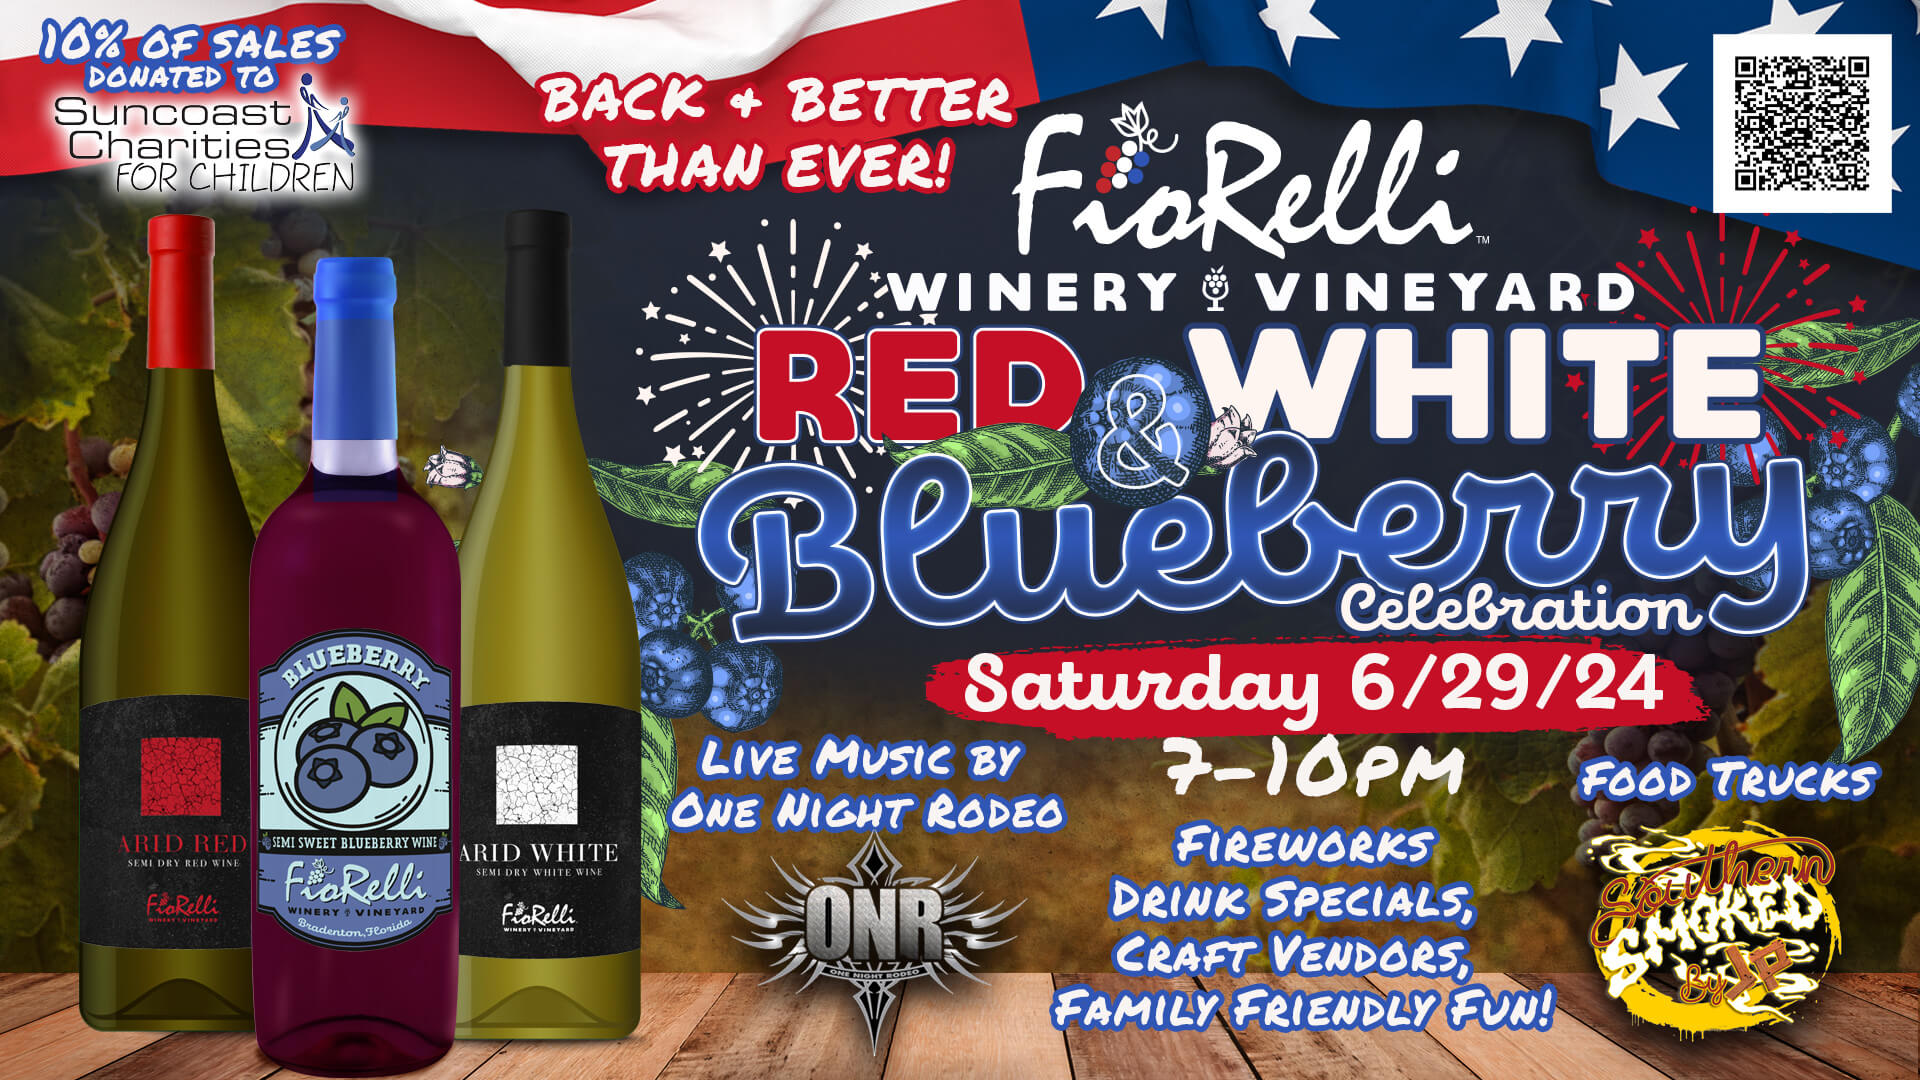 info graphic for Fiorelli Red White and Blueberry event